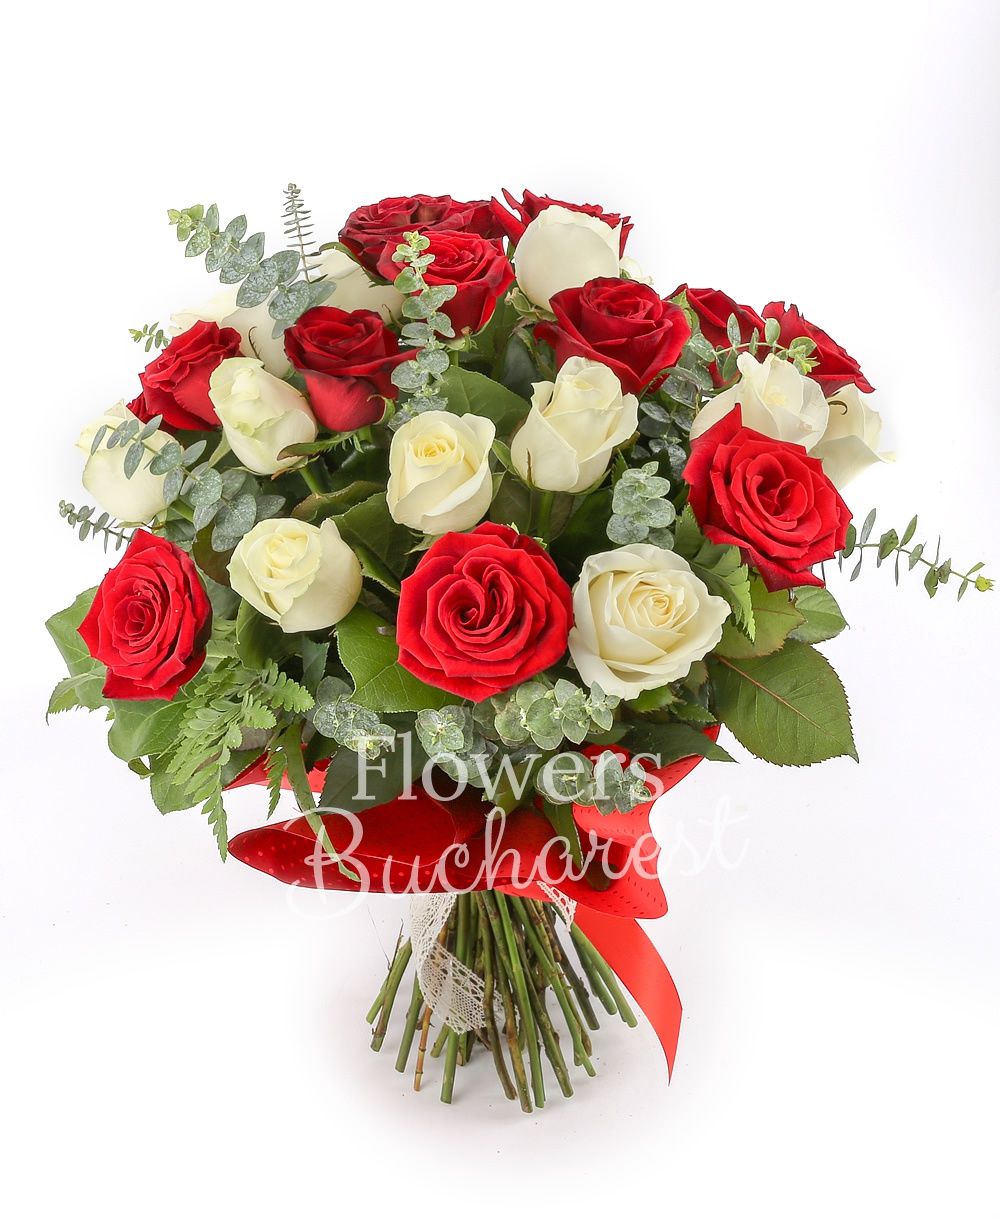 15 red roses, 14 white roses, greenery